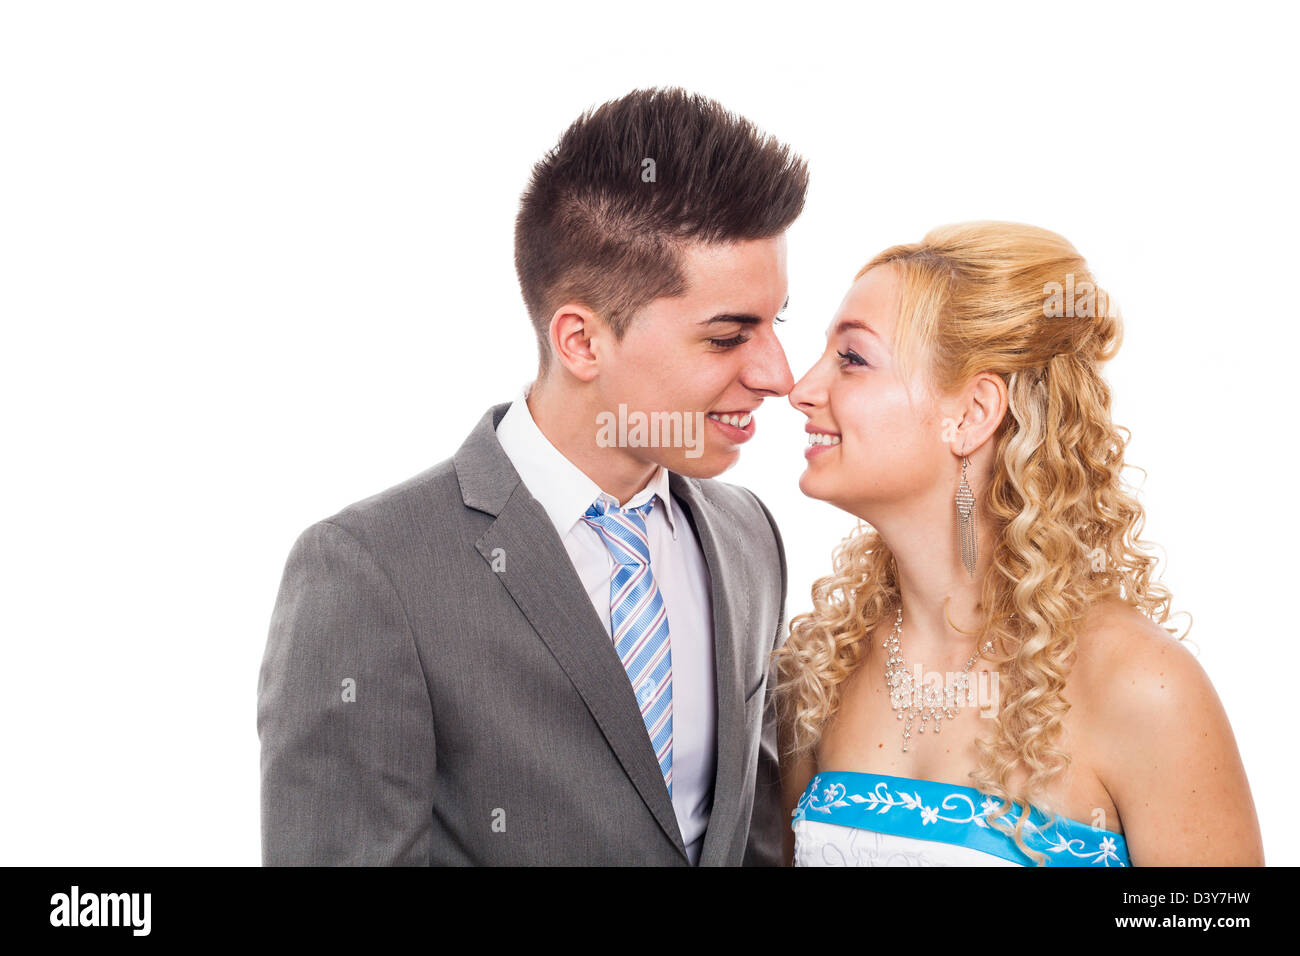 Wedding portrait of happy bride and groom, isolated on white background. Stock Photo